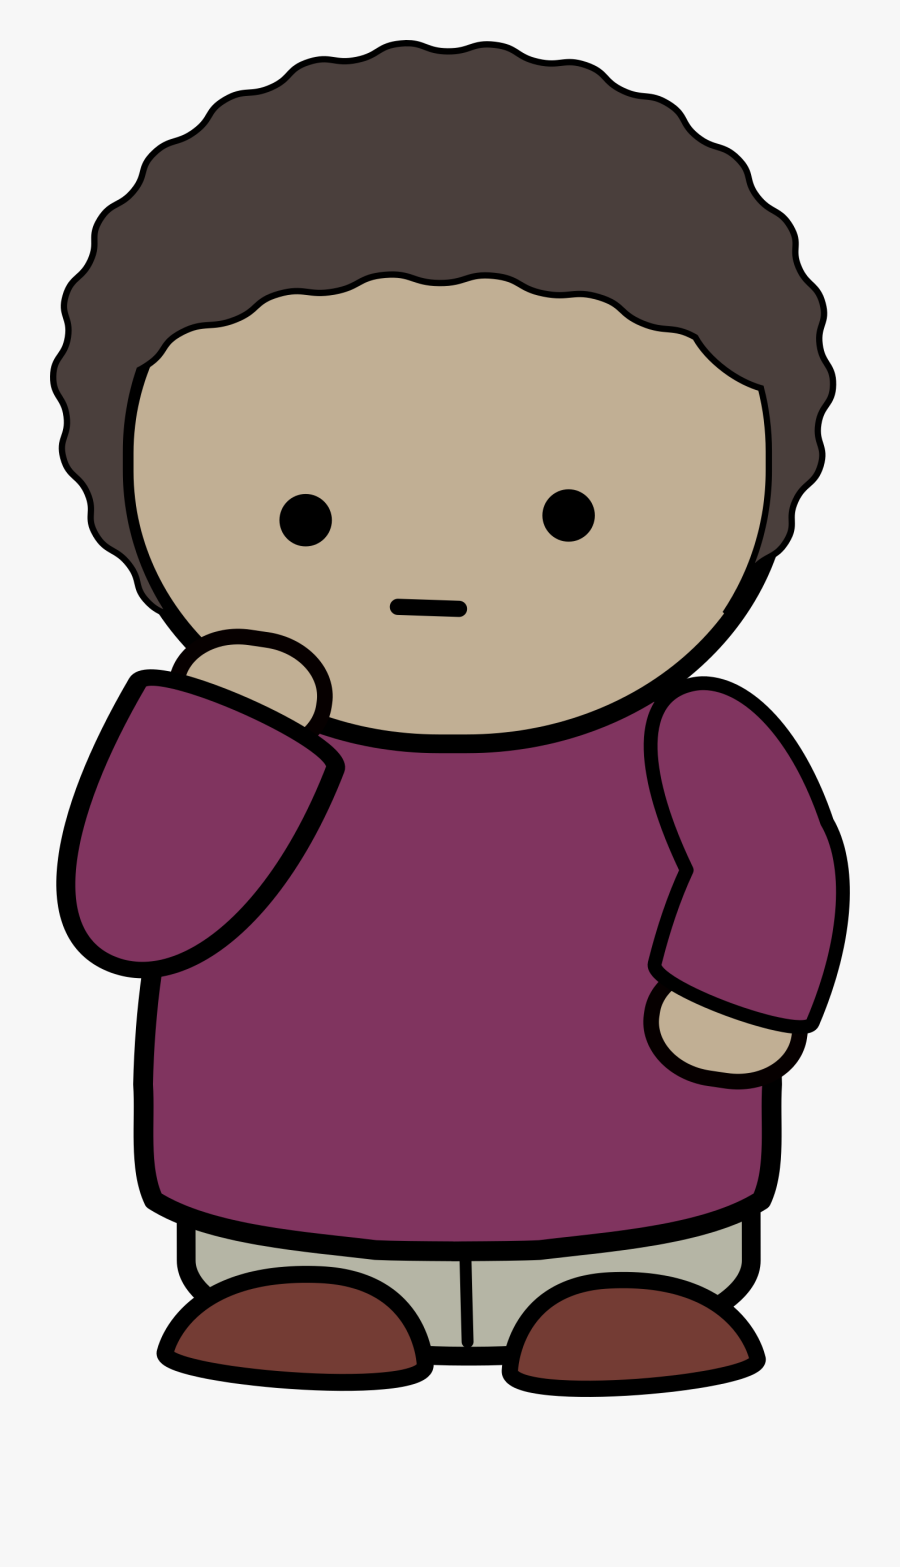 Free Deep In Thought - Clip Art, Transparent Clipart